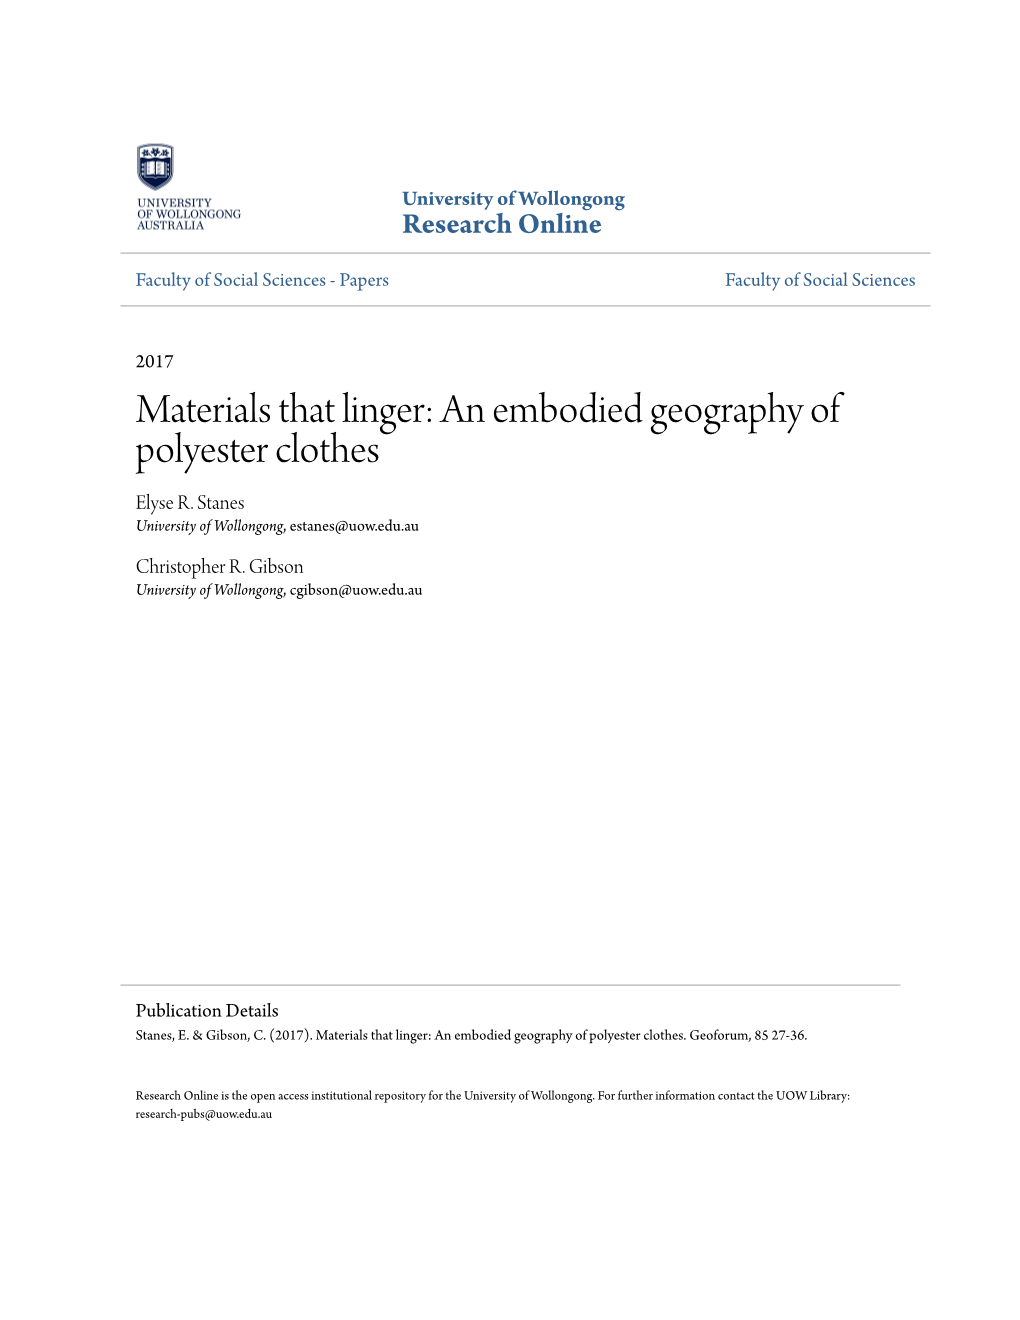 Materials That Linger: an Embodied Geography of Polyester Clothes Elyse R